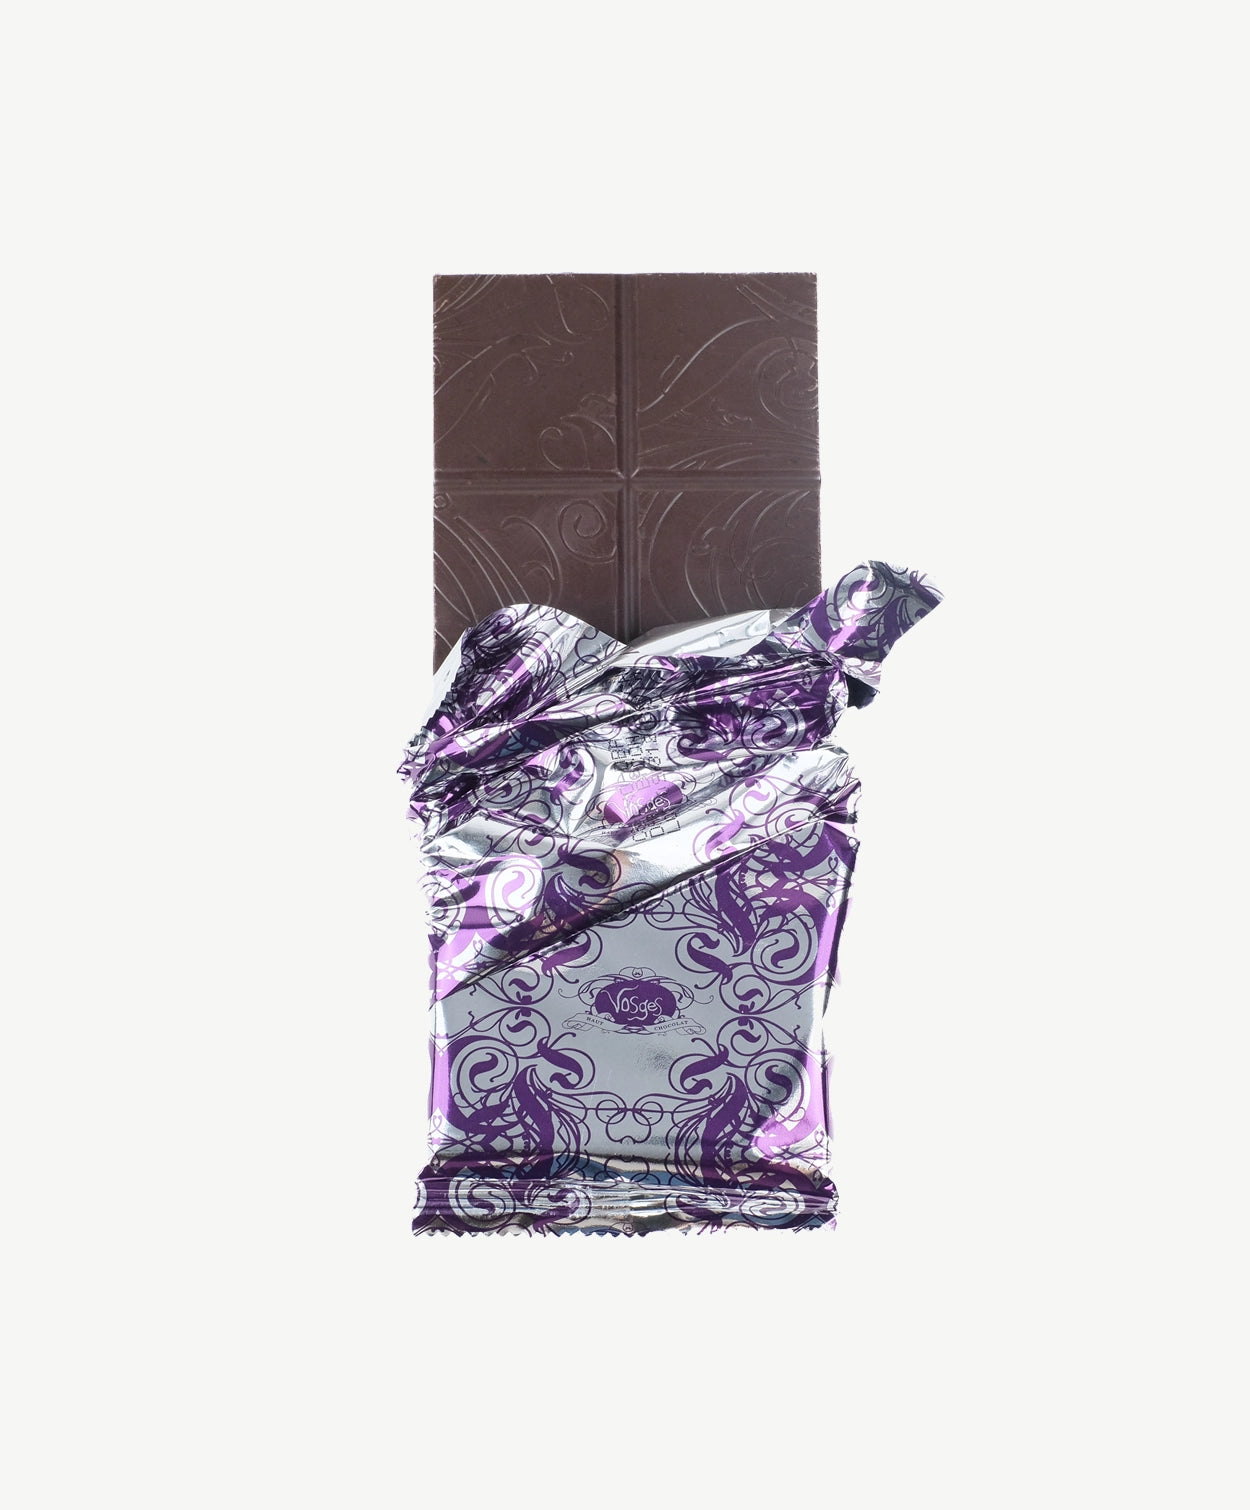 An opened Vosges Raw Honey Cacao Chocolate bar in a silver wrapper stands upright on a white background.